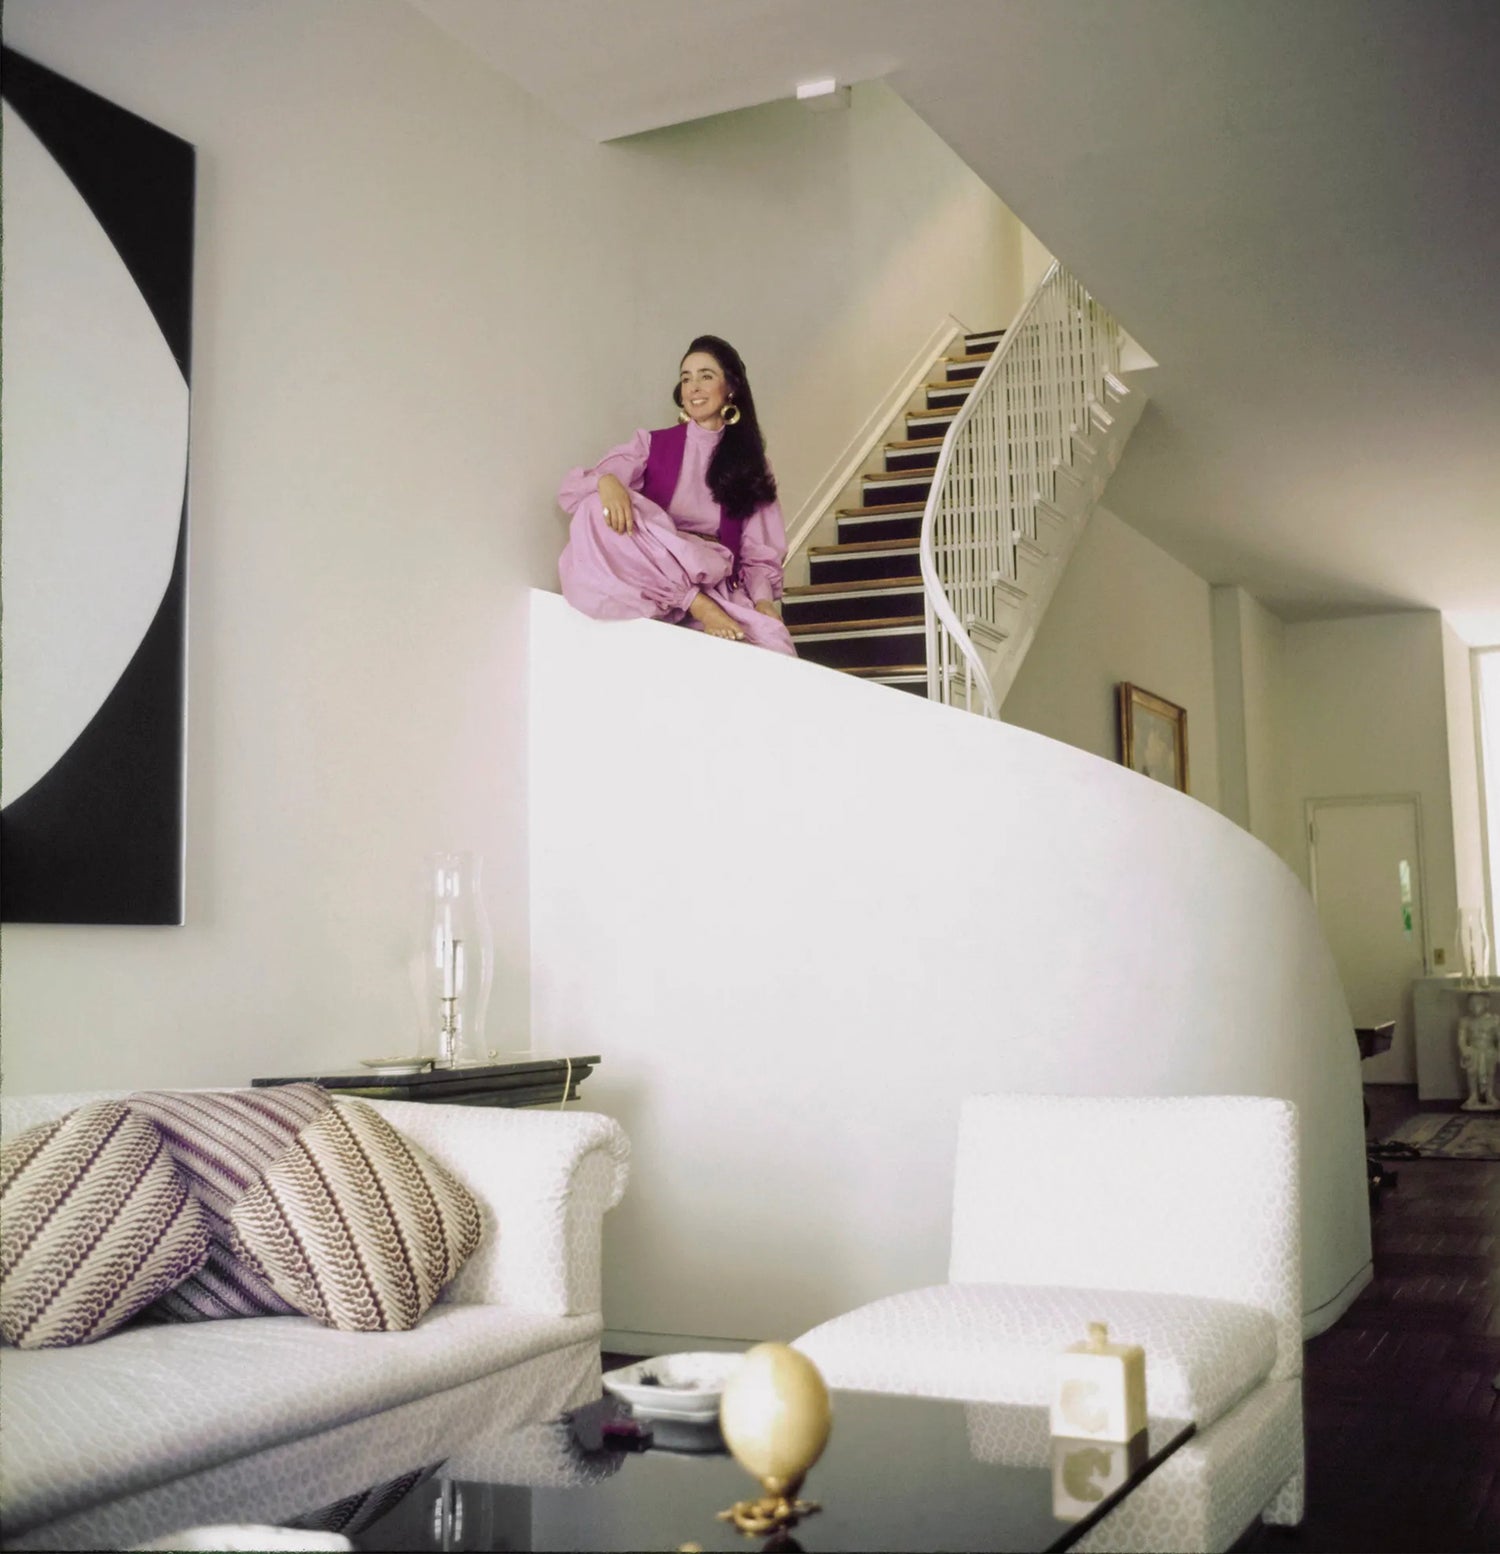 Mica at home in New York City, photographed by Horst.